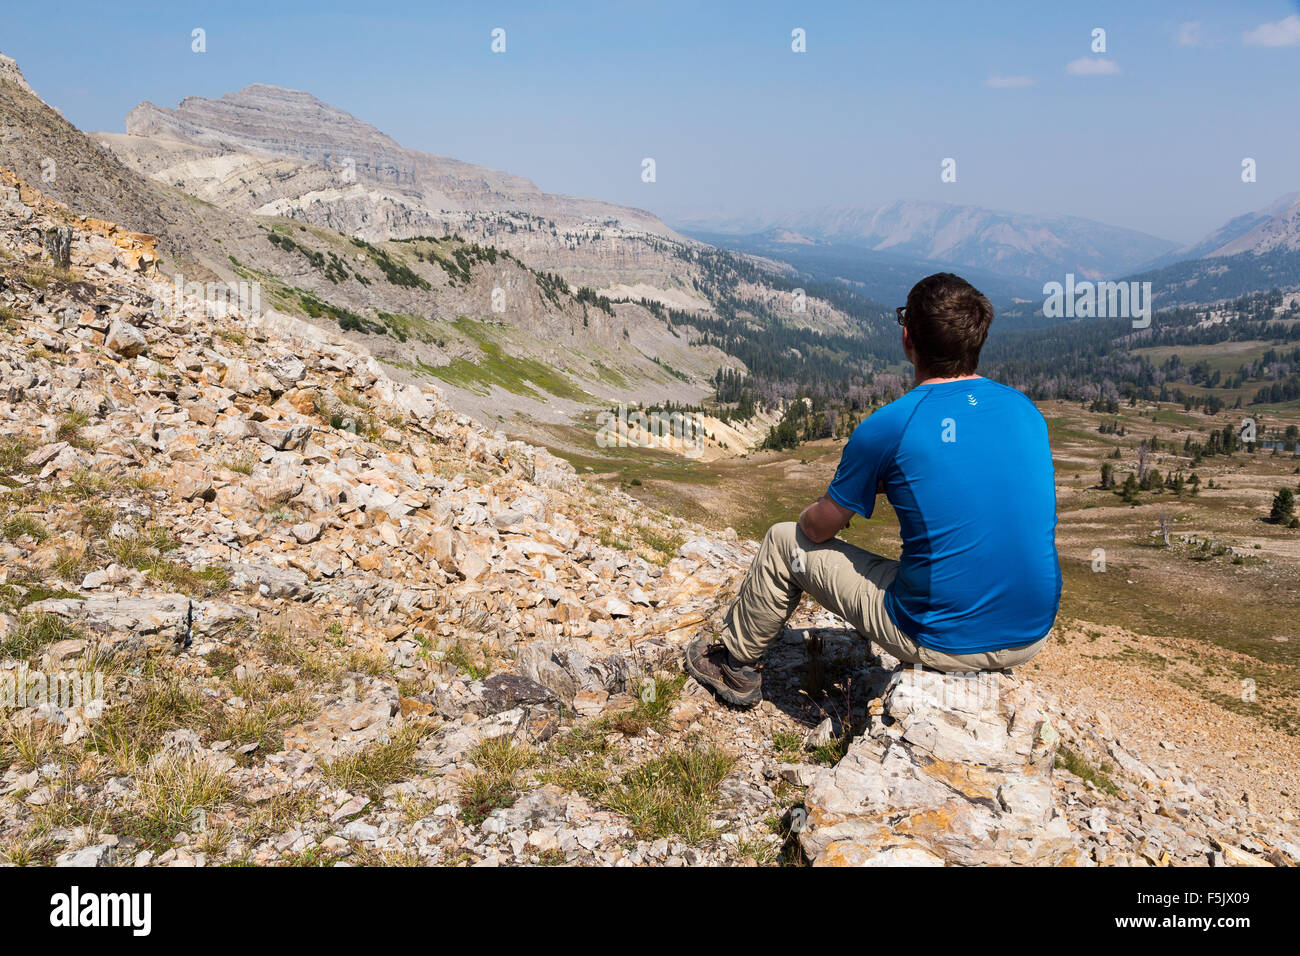 A hiker overlooking the headwaters of Crystal Creek in the Gros Ventre Wilderness, Wyoming Stock Photo